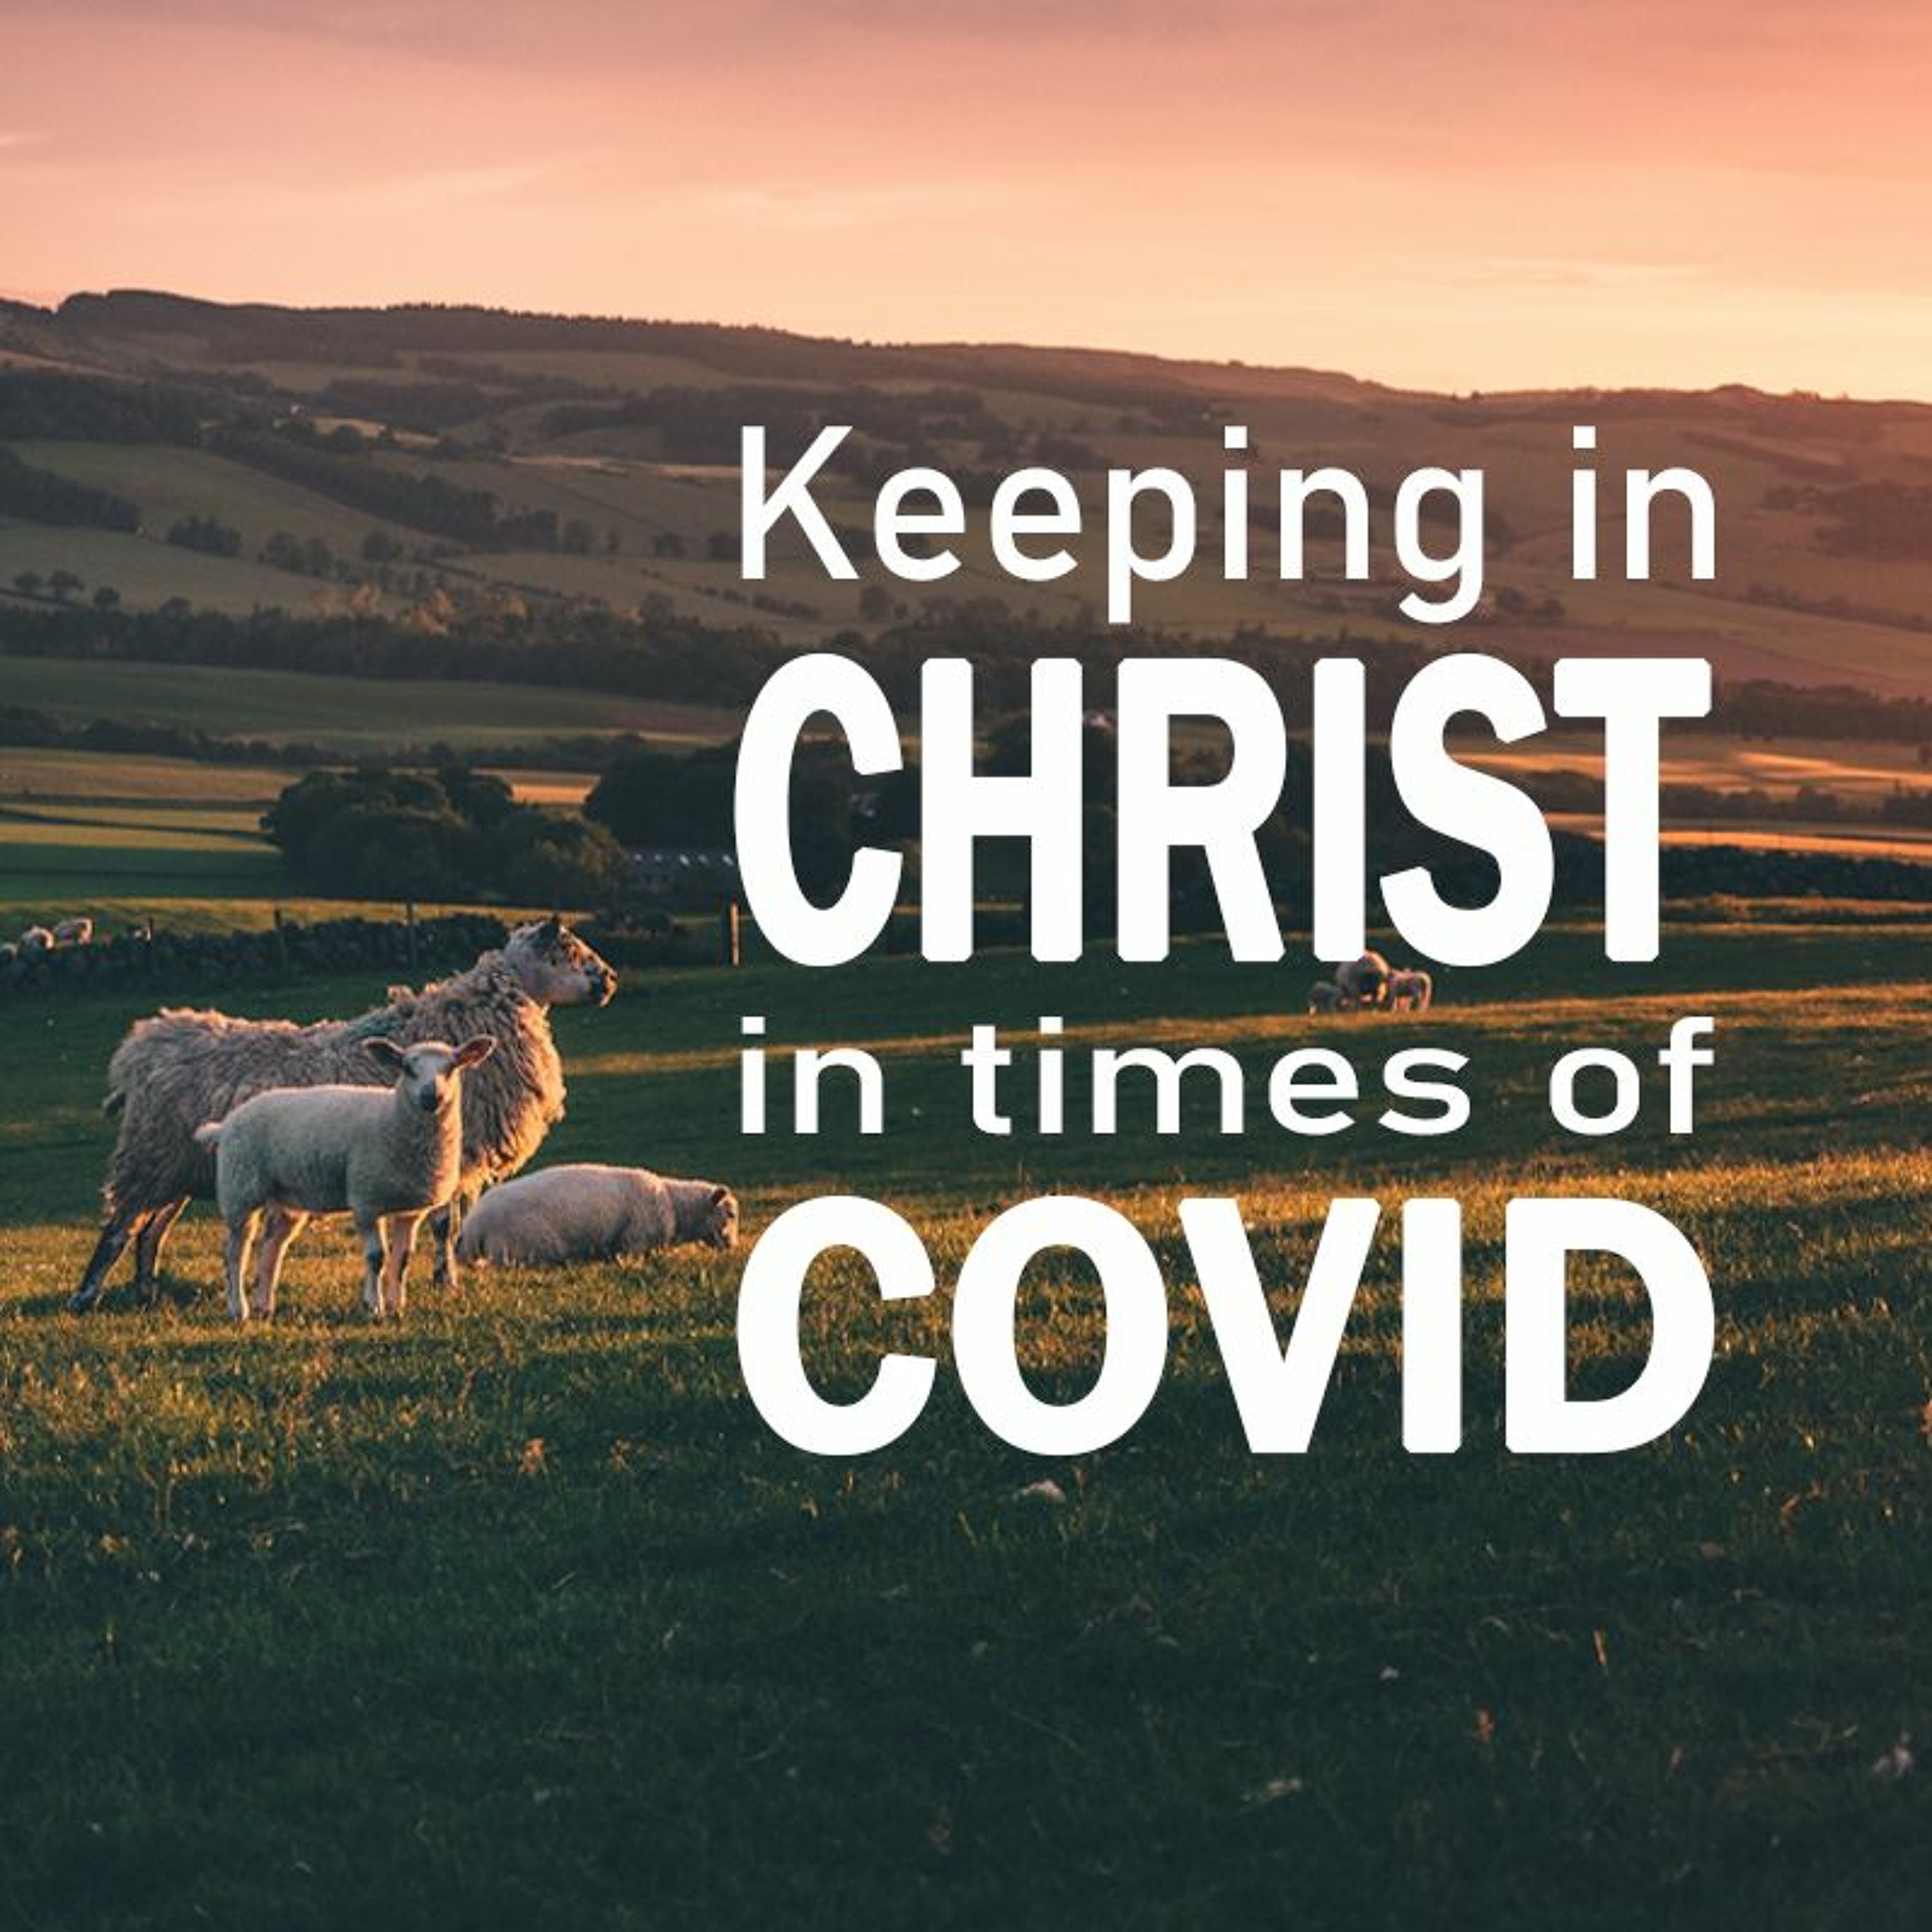 Keeping in Christ in times of Covid | Goodness and mercy